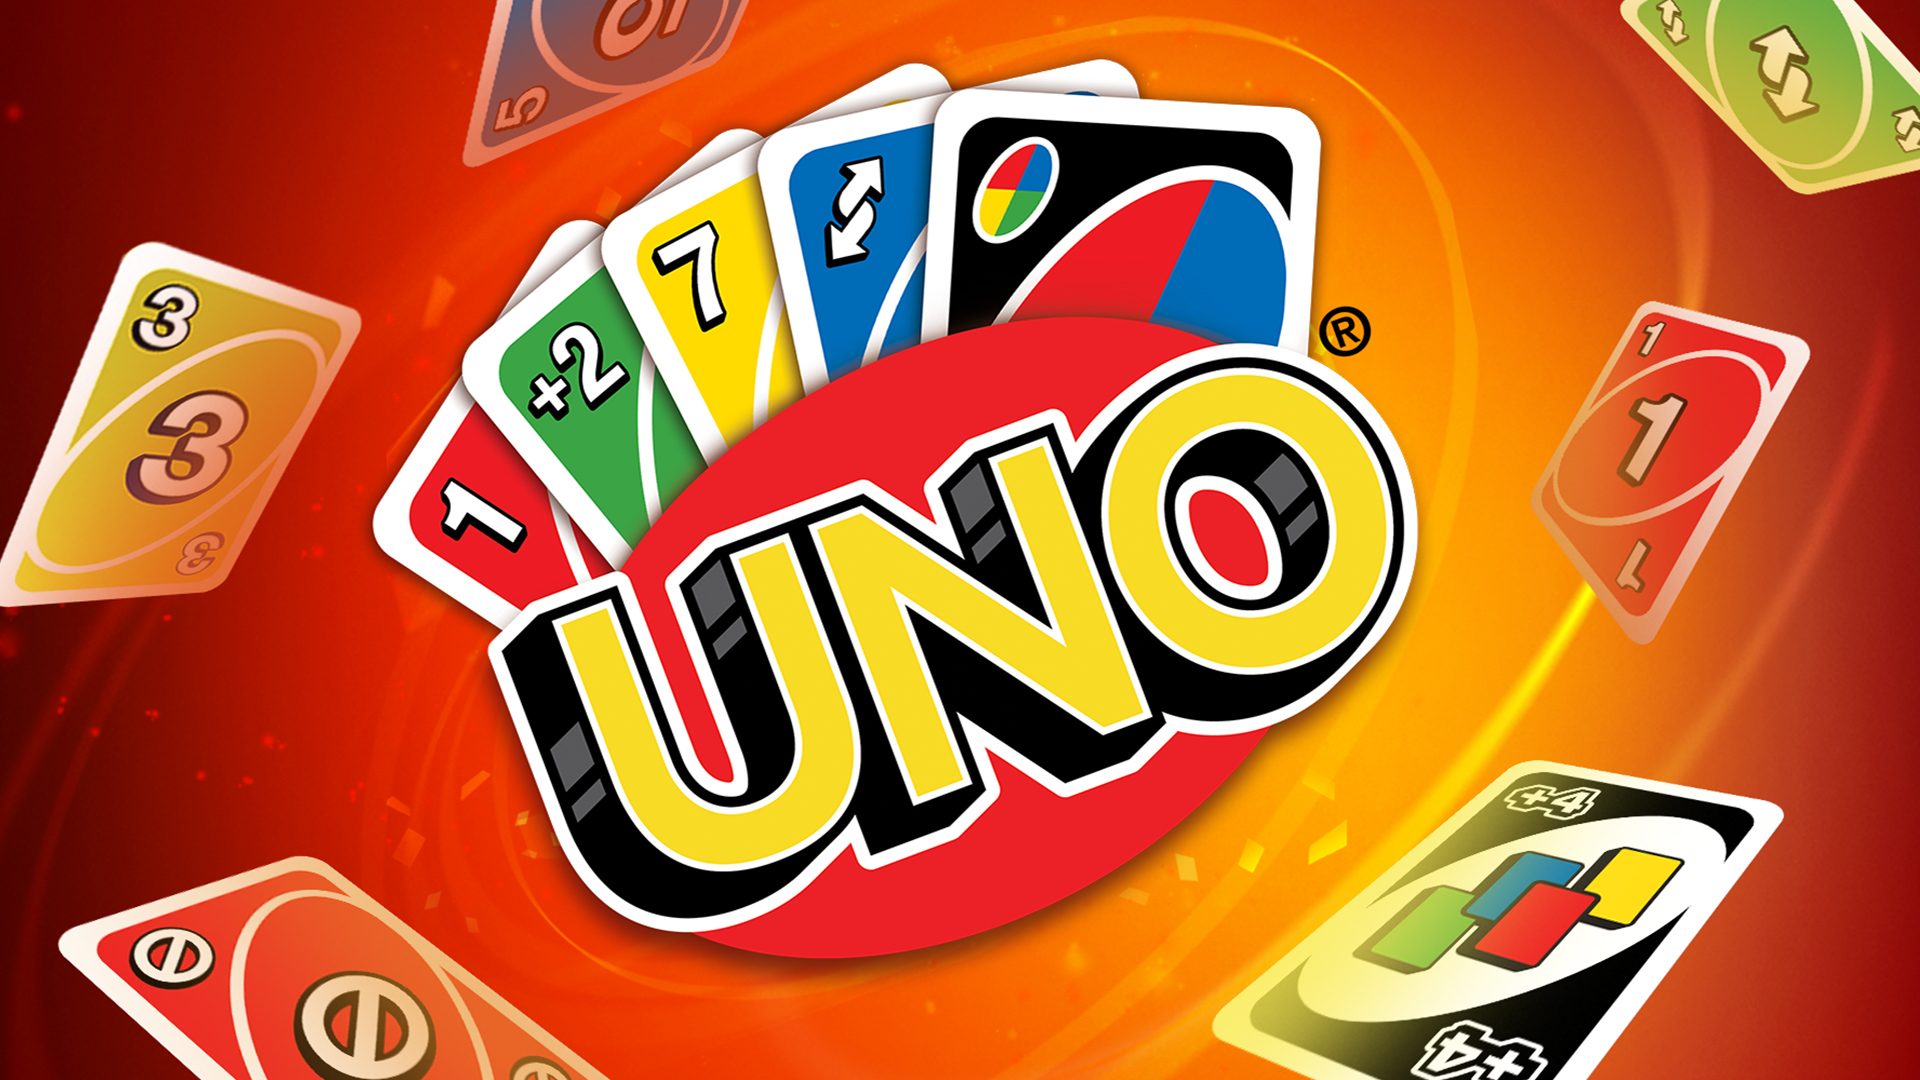 Uno card game online, free play now